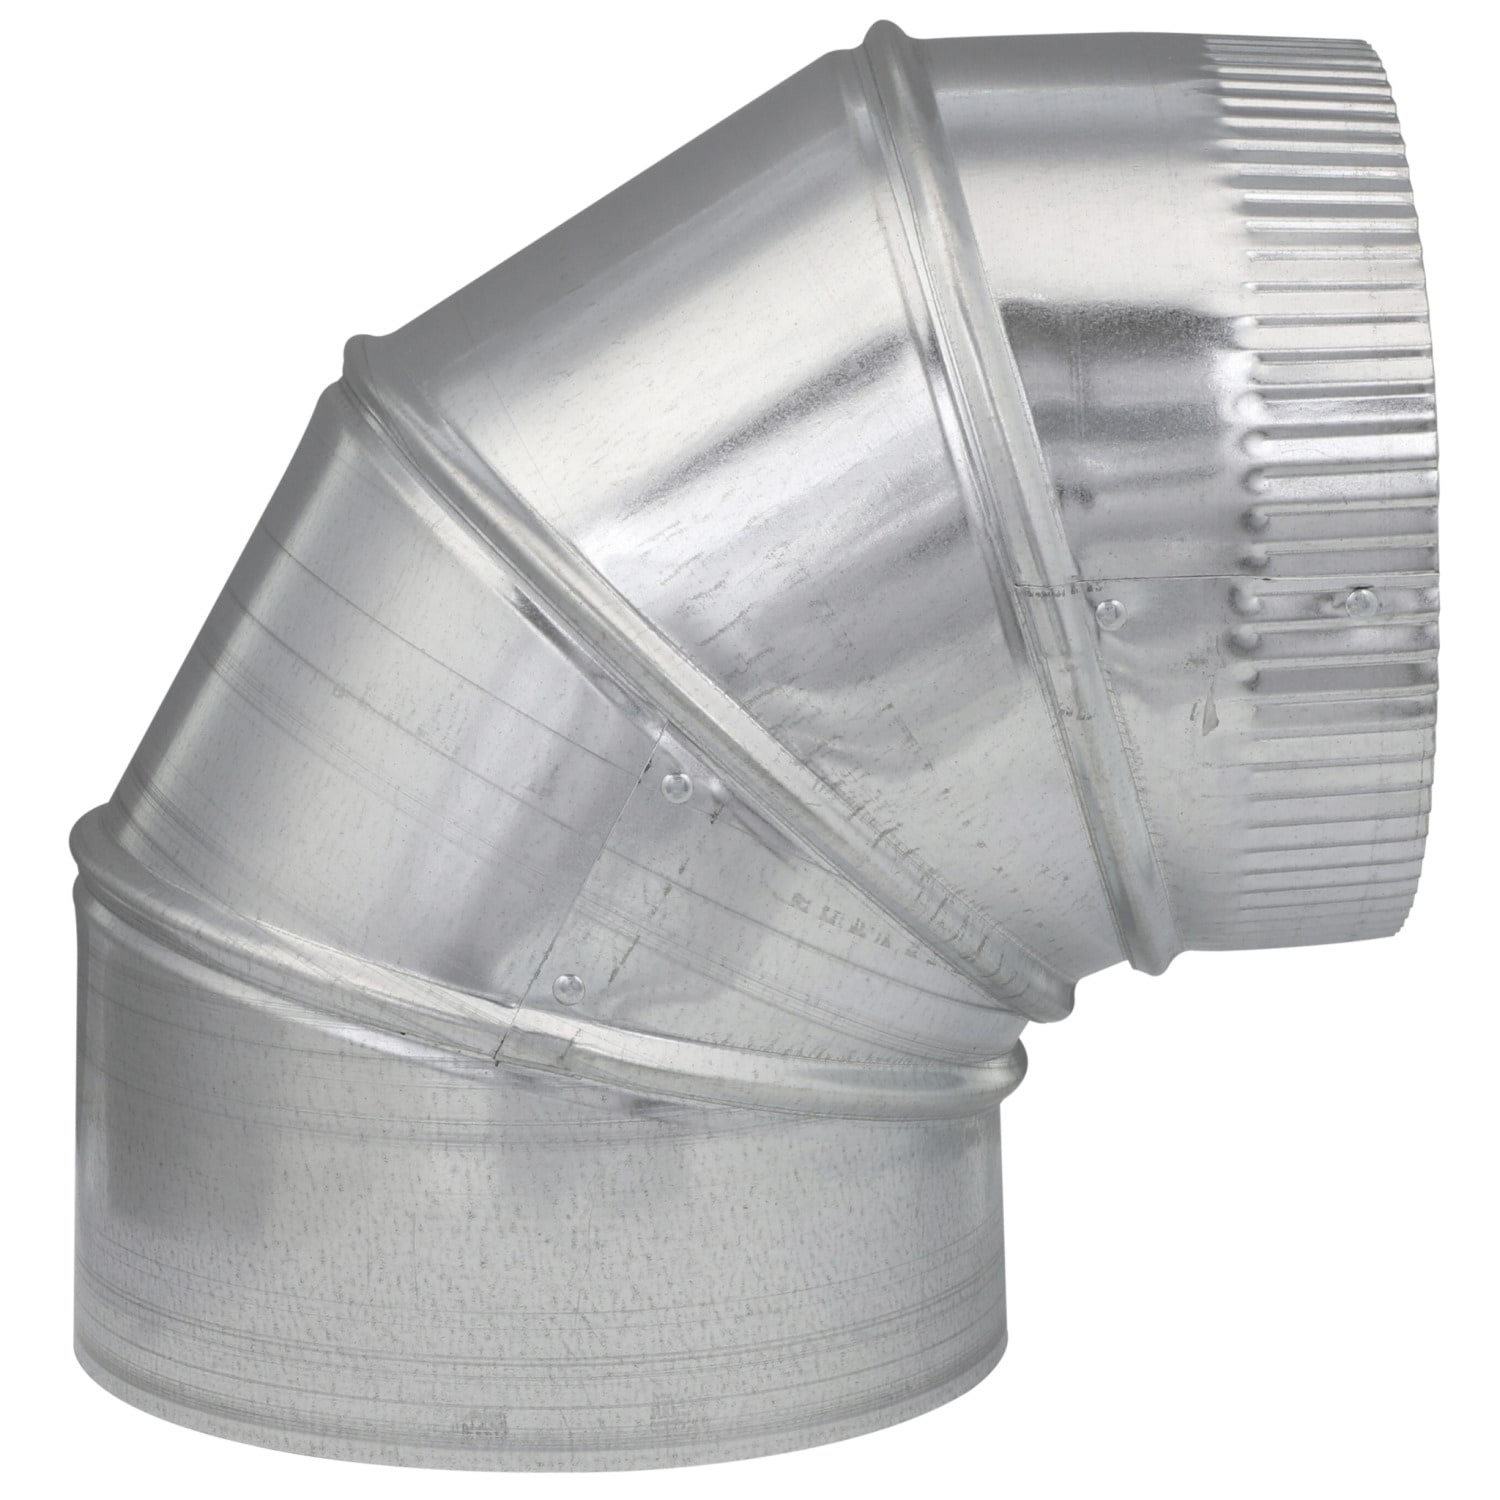 Ø 80 mm 45° Elbow Pressed Bend Duct Fitting For Circular Spiral Ducting Made Of Galvanised Steel